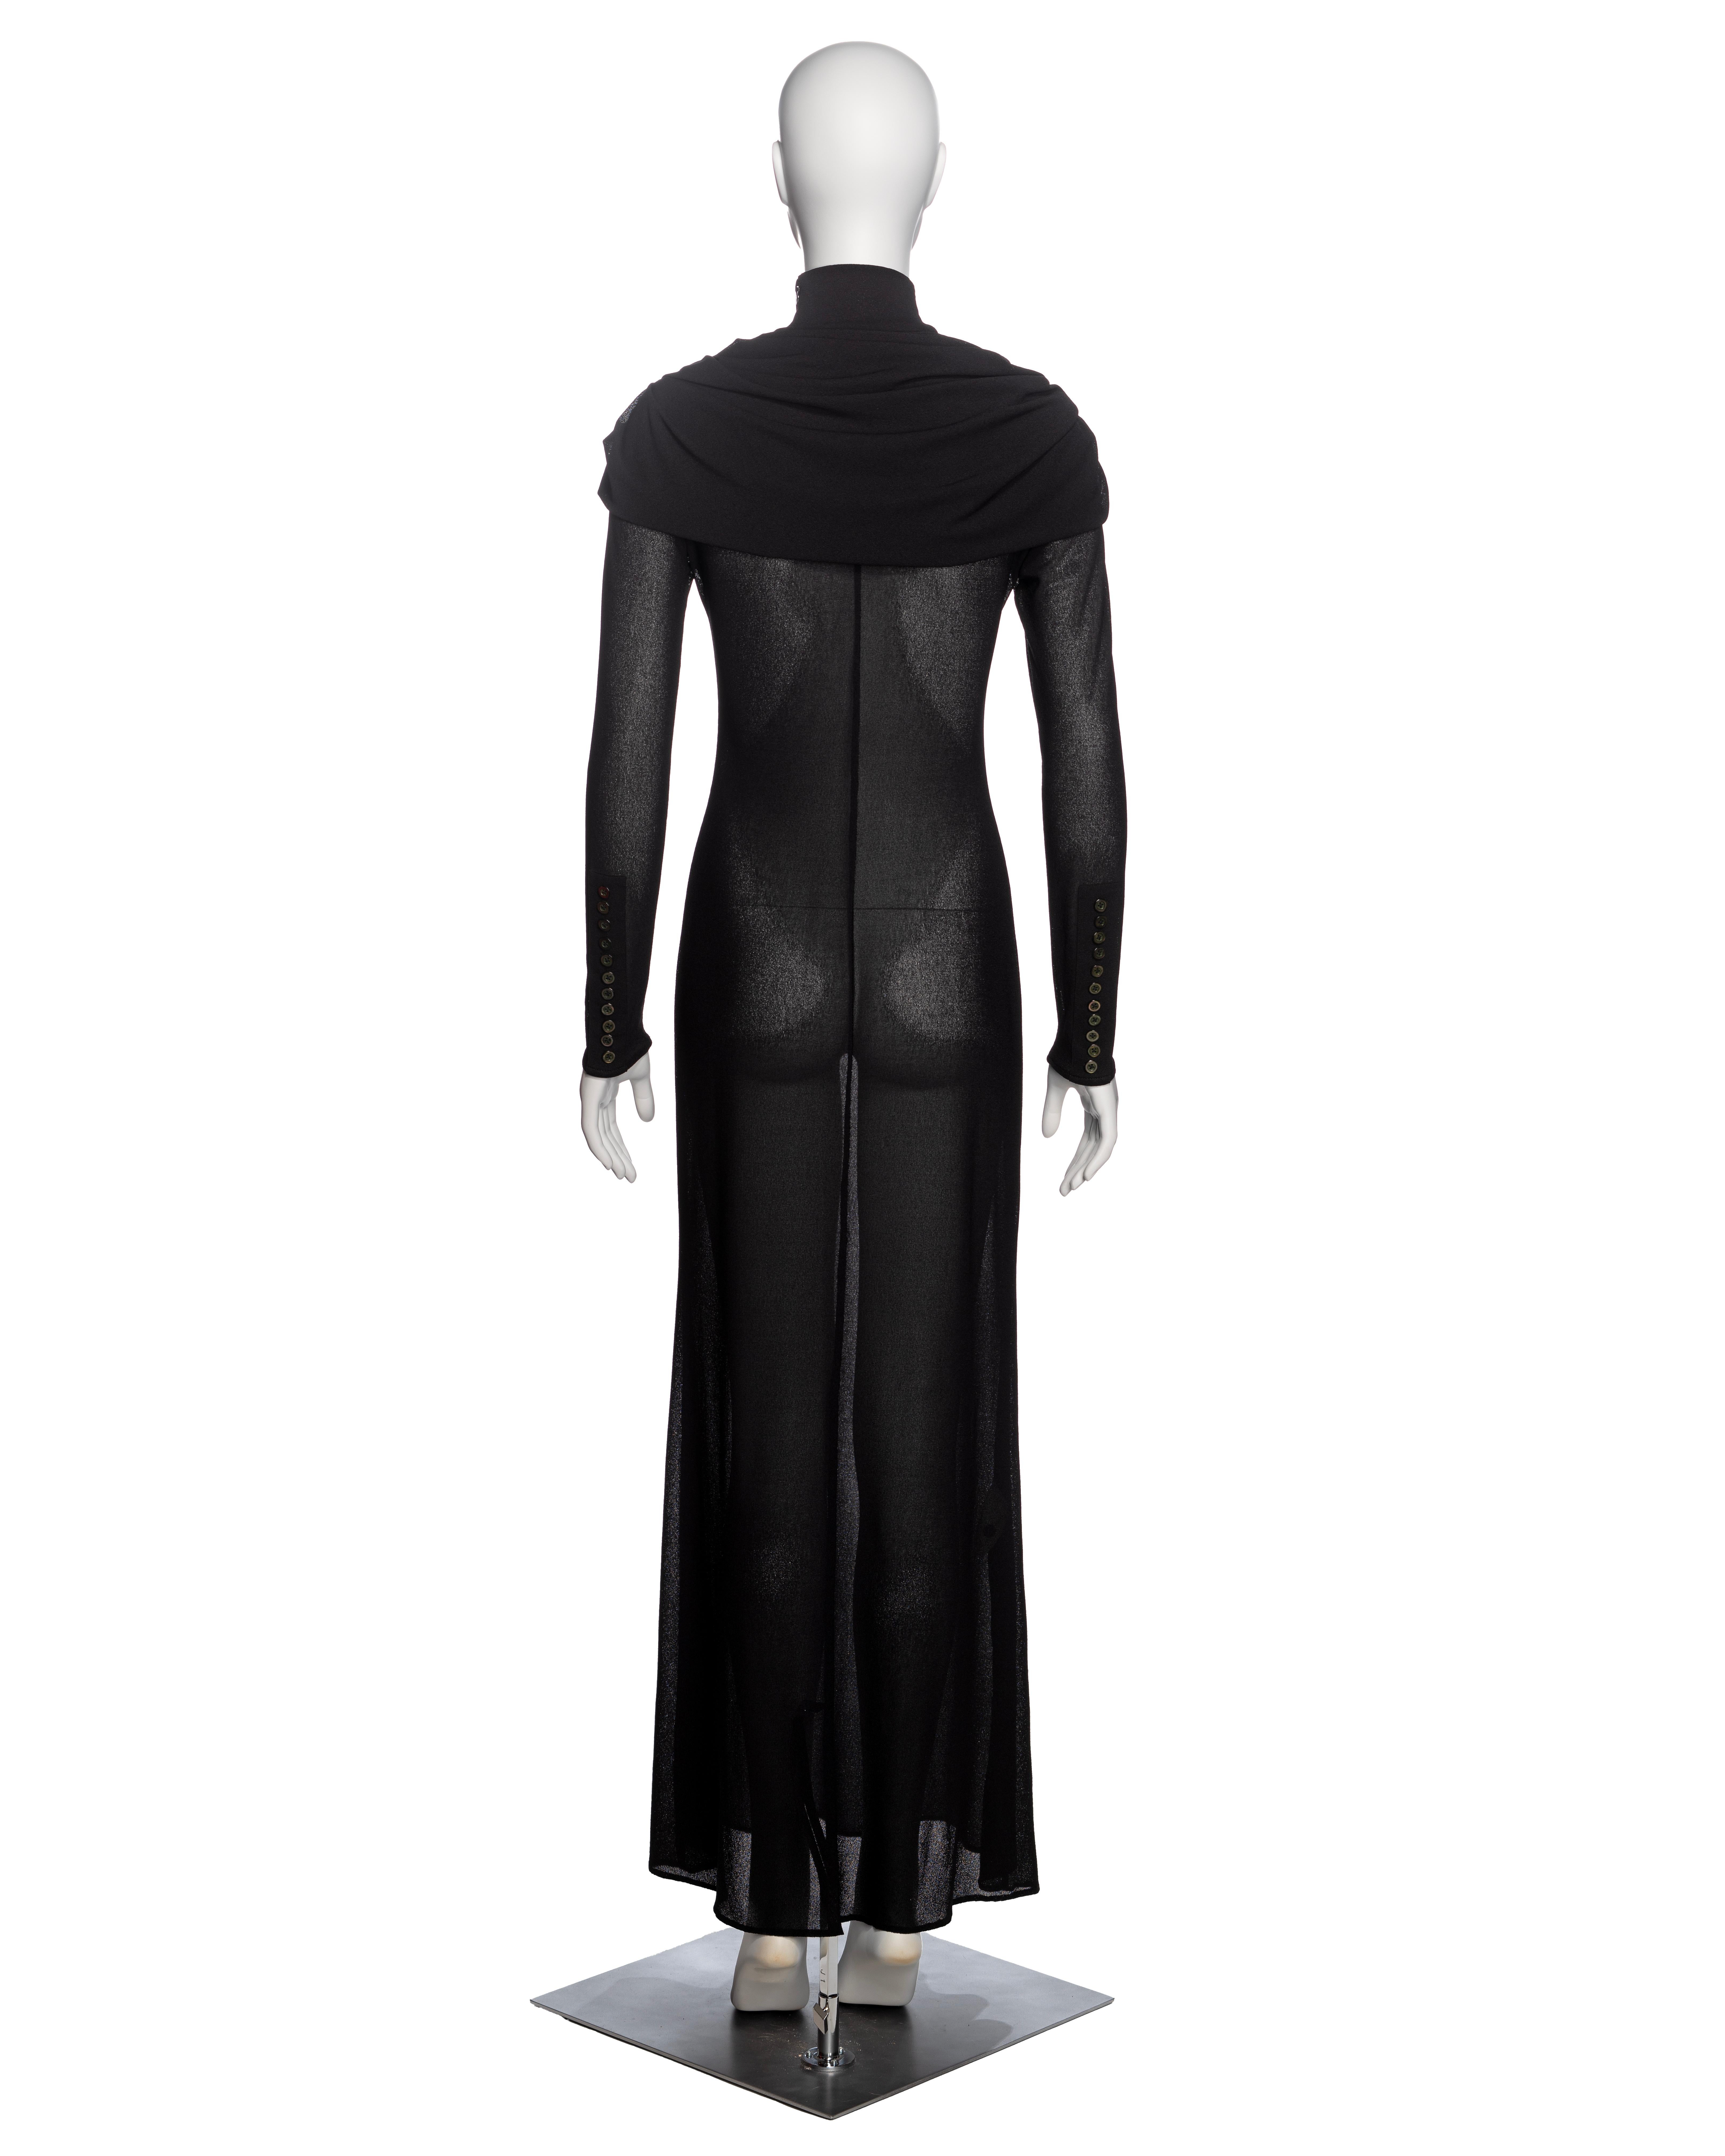 Alexander McQueen Black Mock Neck Evening Dress with Draped Cowl, 'Joan' FW 1998 For Sale 7